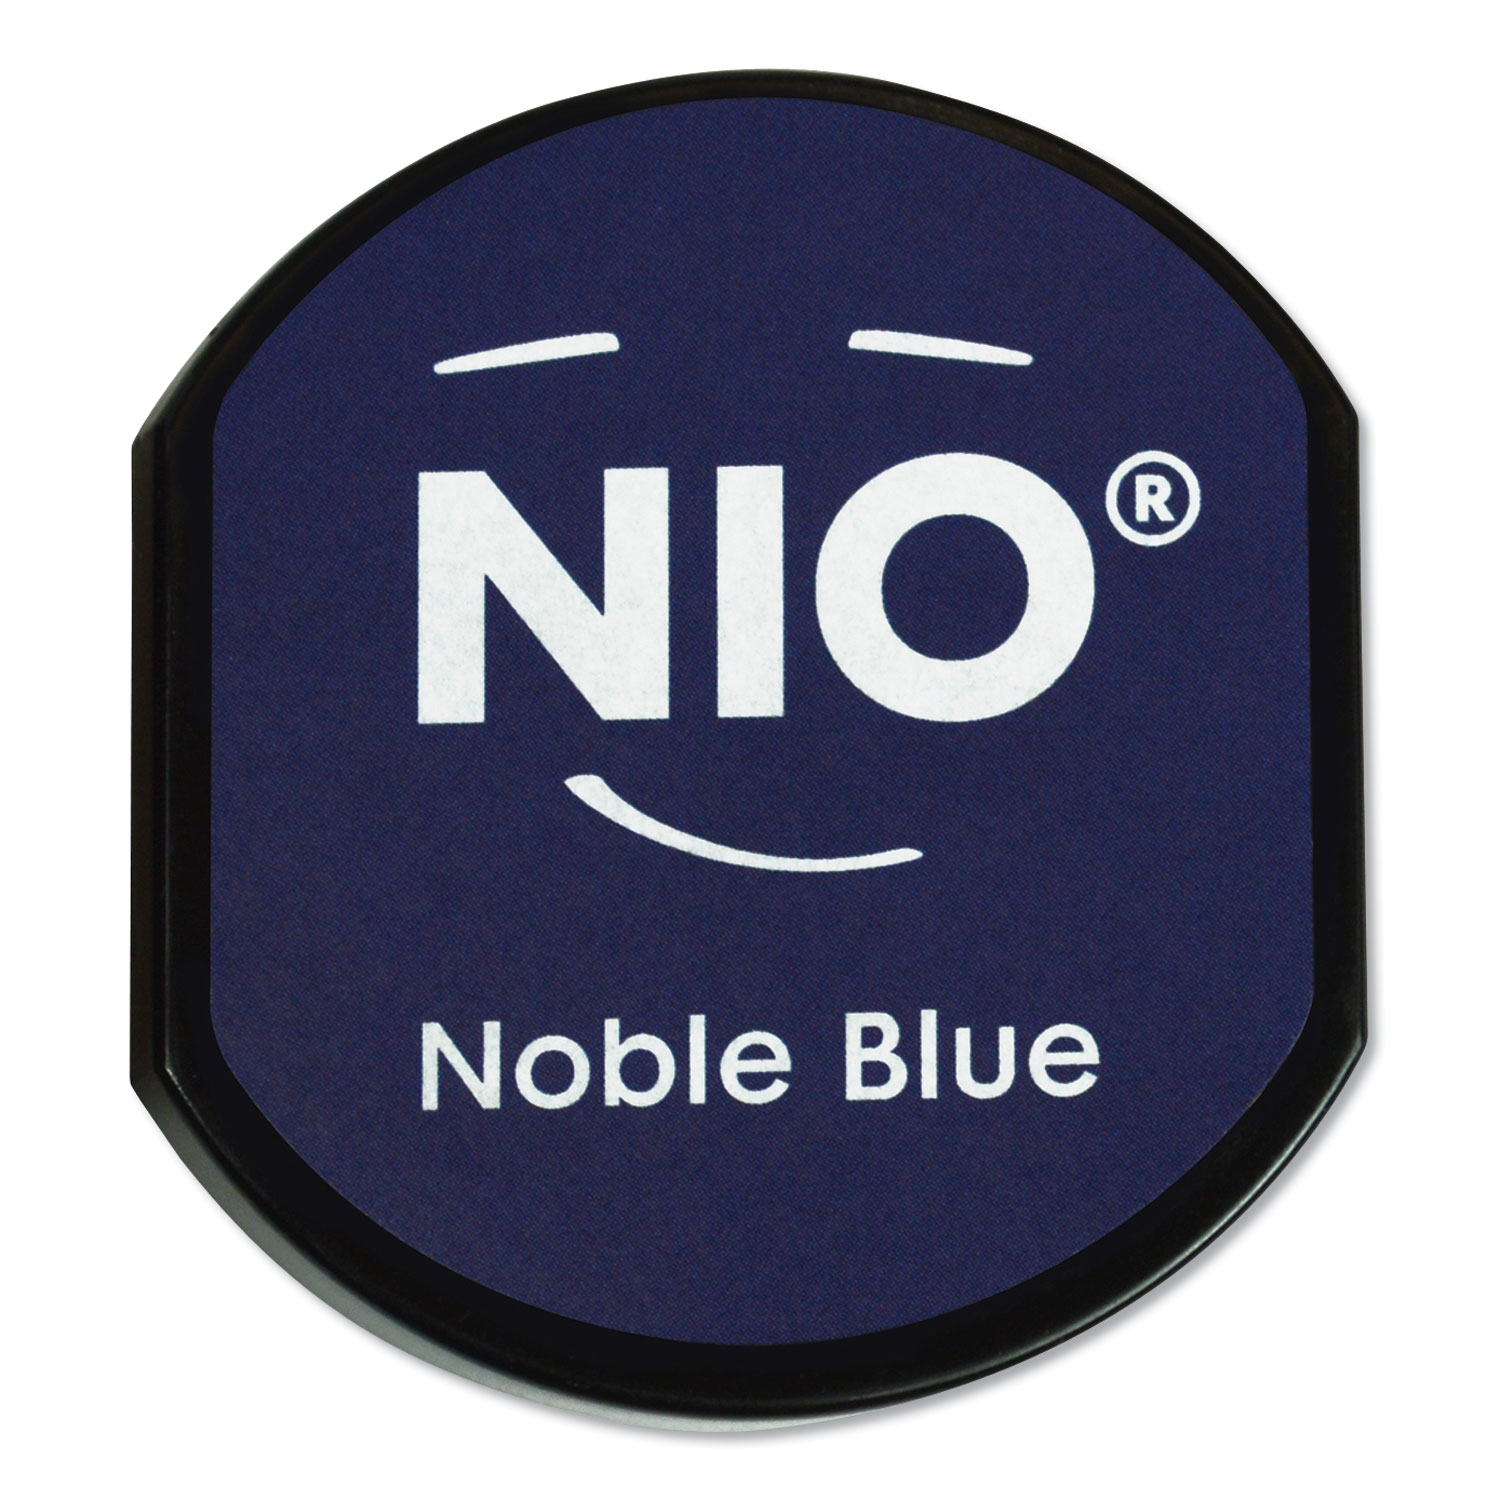  NIO 071510 Ink Pad for NIO Stamp with Voucher, Noble Blue (COS071510) 